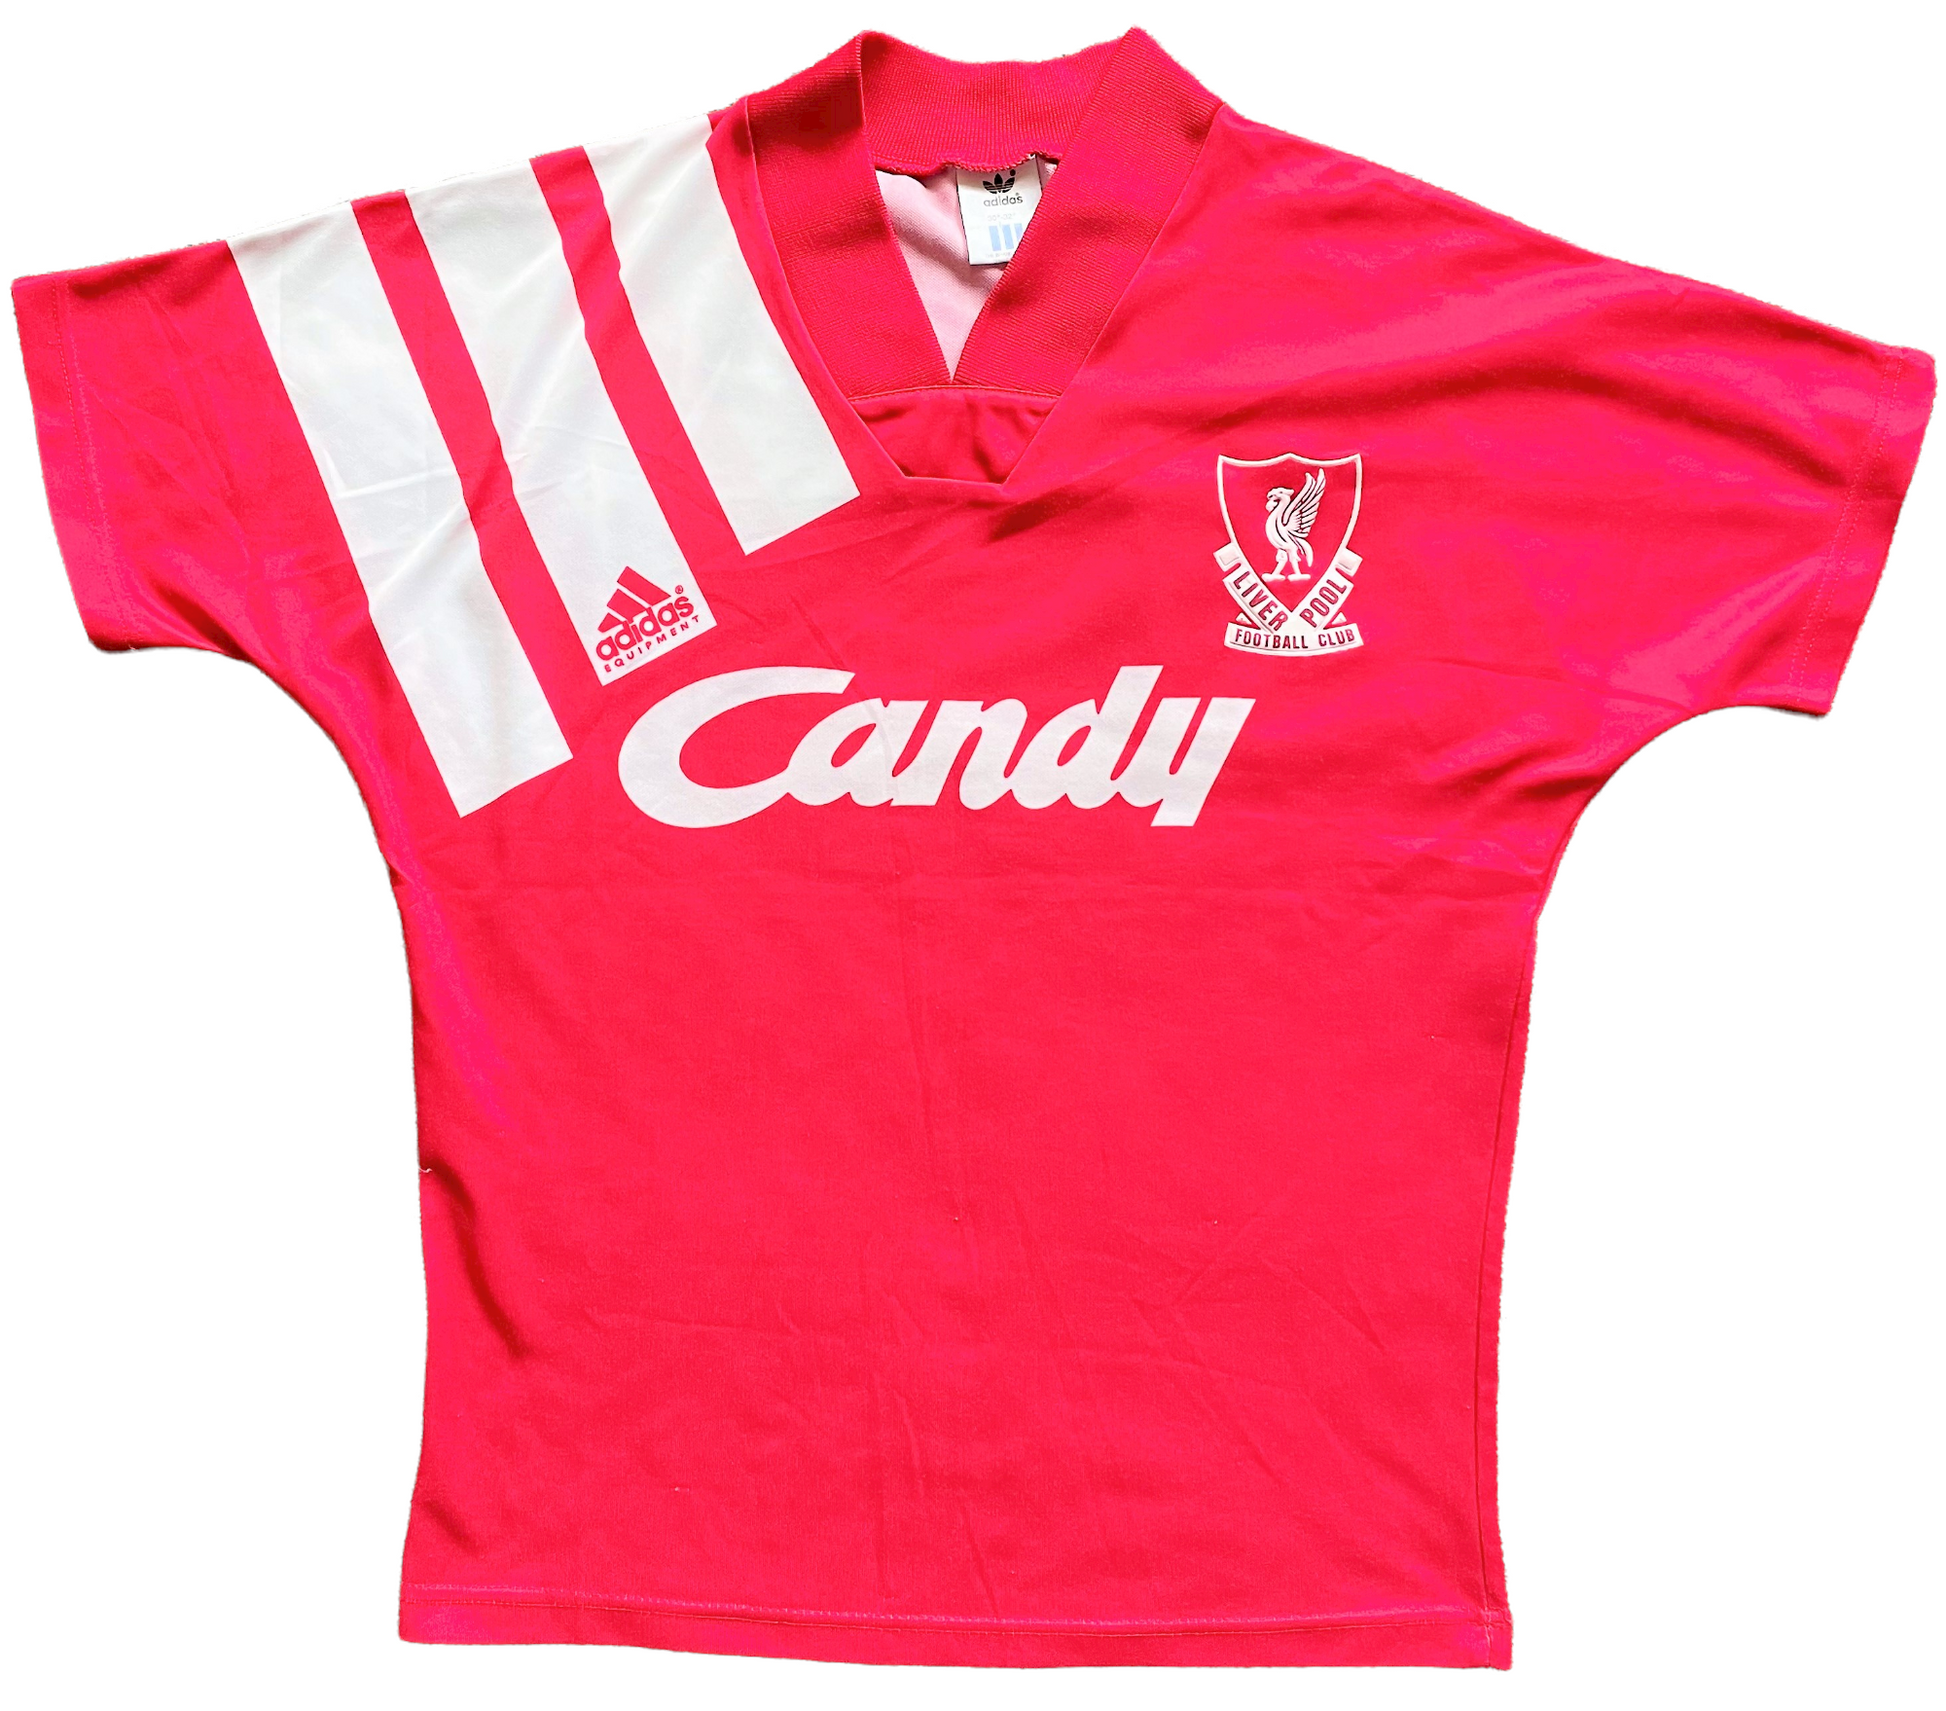 1991-92 Liverpool Home Shirt (very good) Youths 30-32.